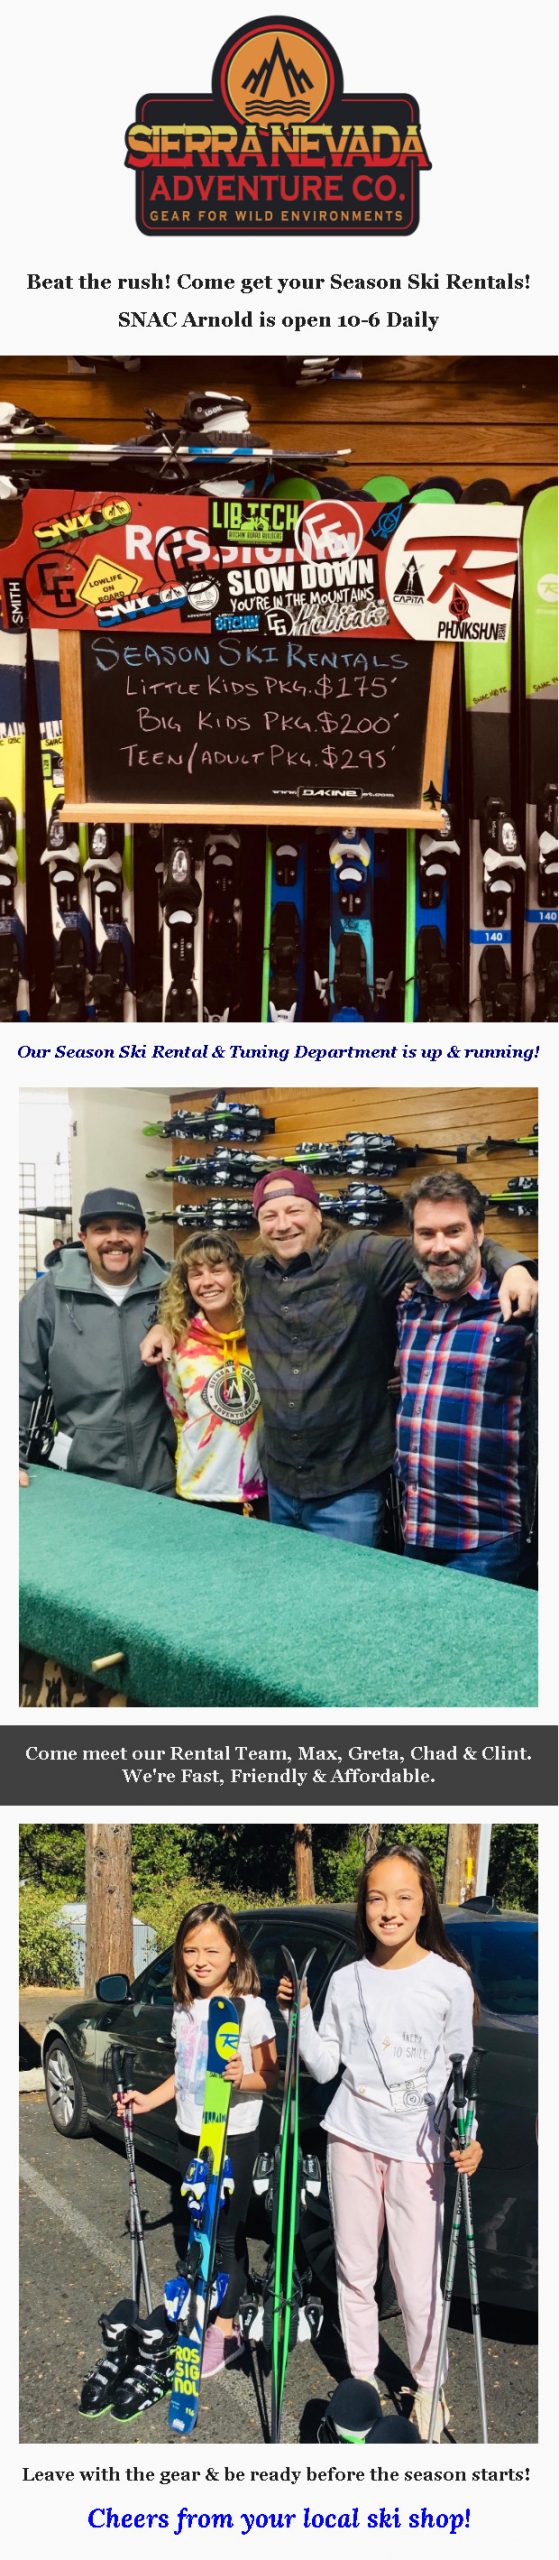 Beat the Rush! Come Get Your Season Ski Rentals! SNAC Arnold is open 10-6 Daily!